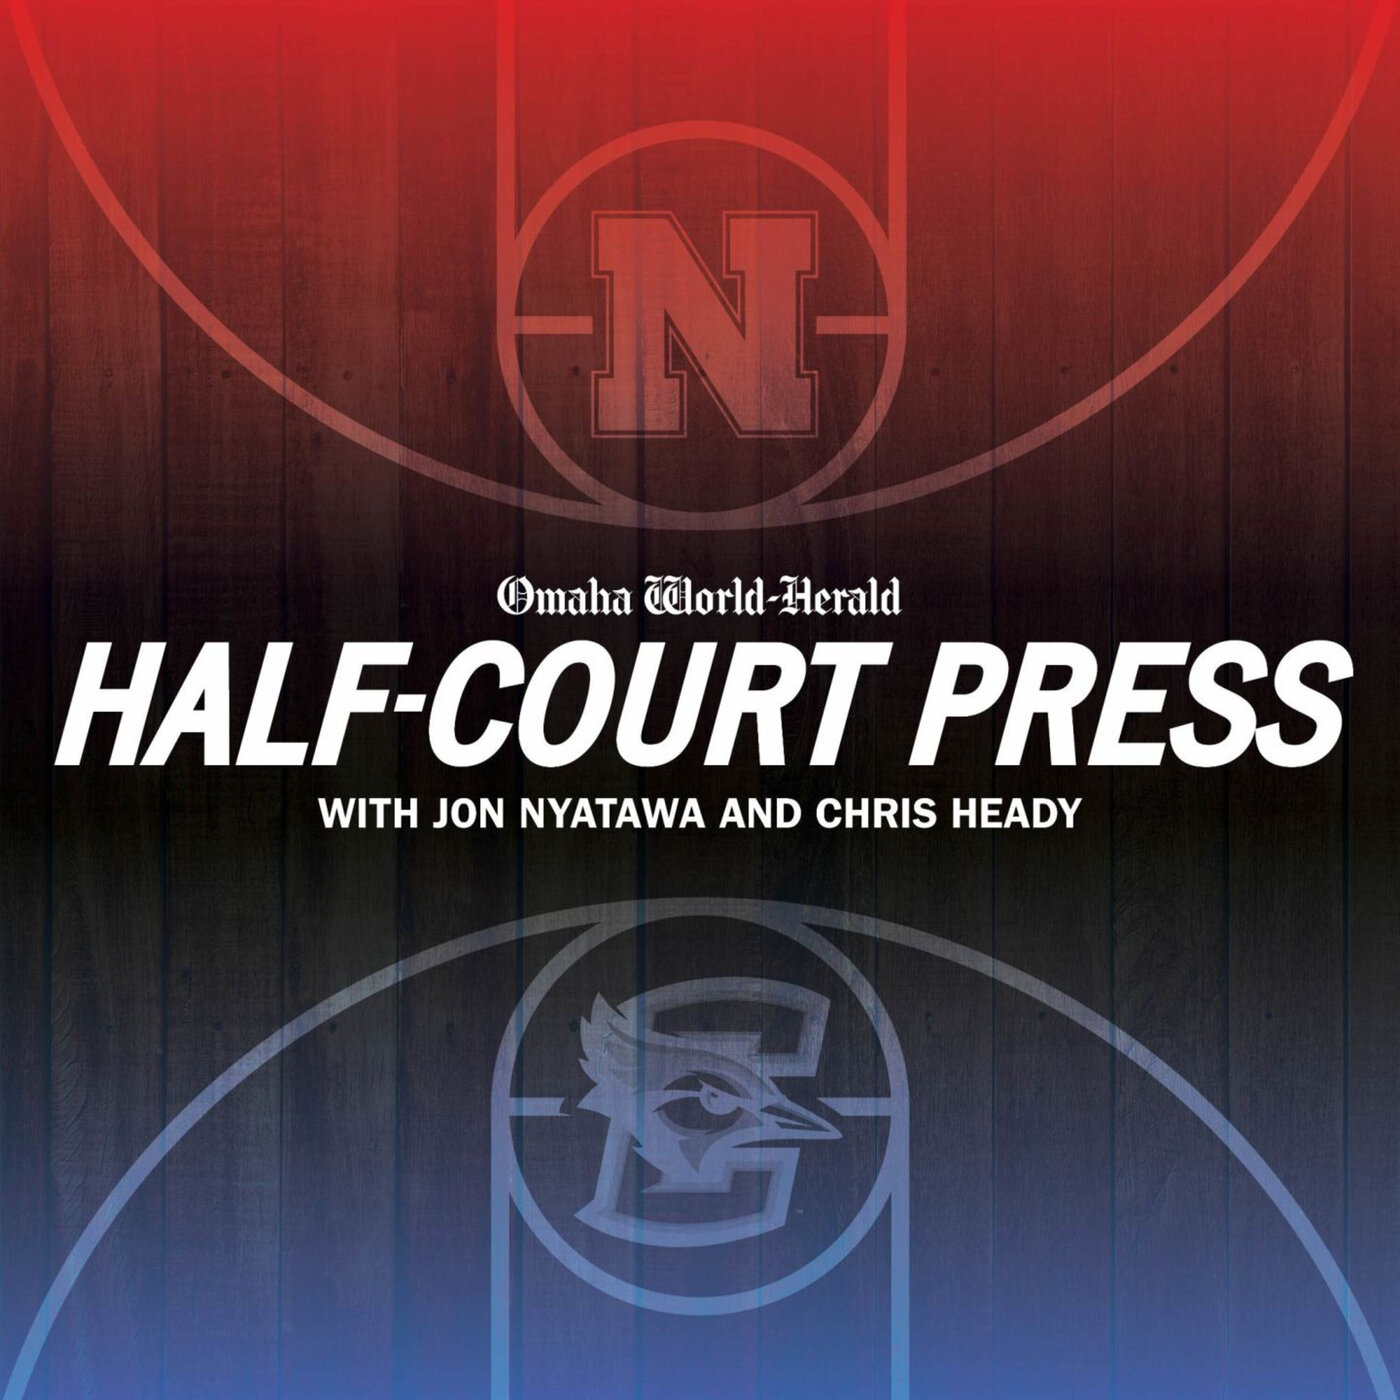 Half-Court Press: Offseason roster reset in the Big East